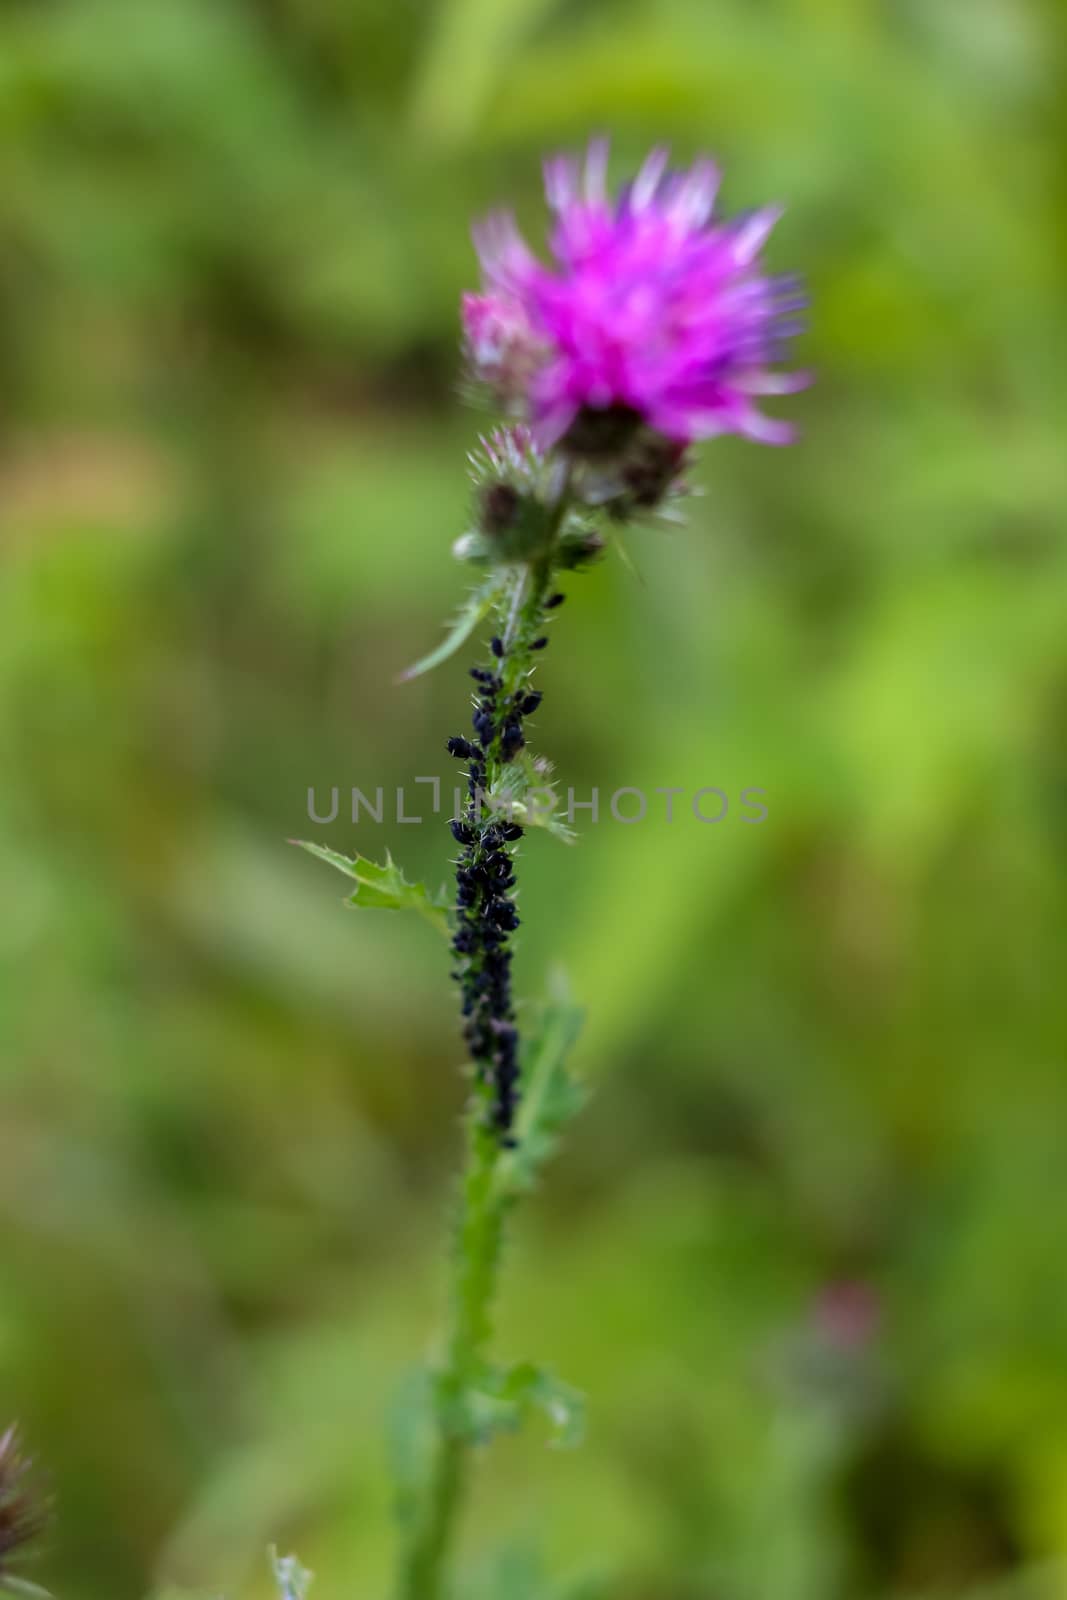 Thistle with insects on the stem in green meadow. Wild pink blooming thistle. Violet flowers. Blooming flowers. Pink thistles on a green grass. Meadow with flowers. Wild flowers. Nature flower. Blooming burdock on field. 

